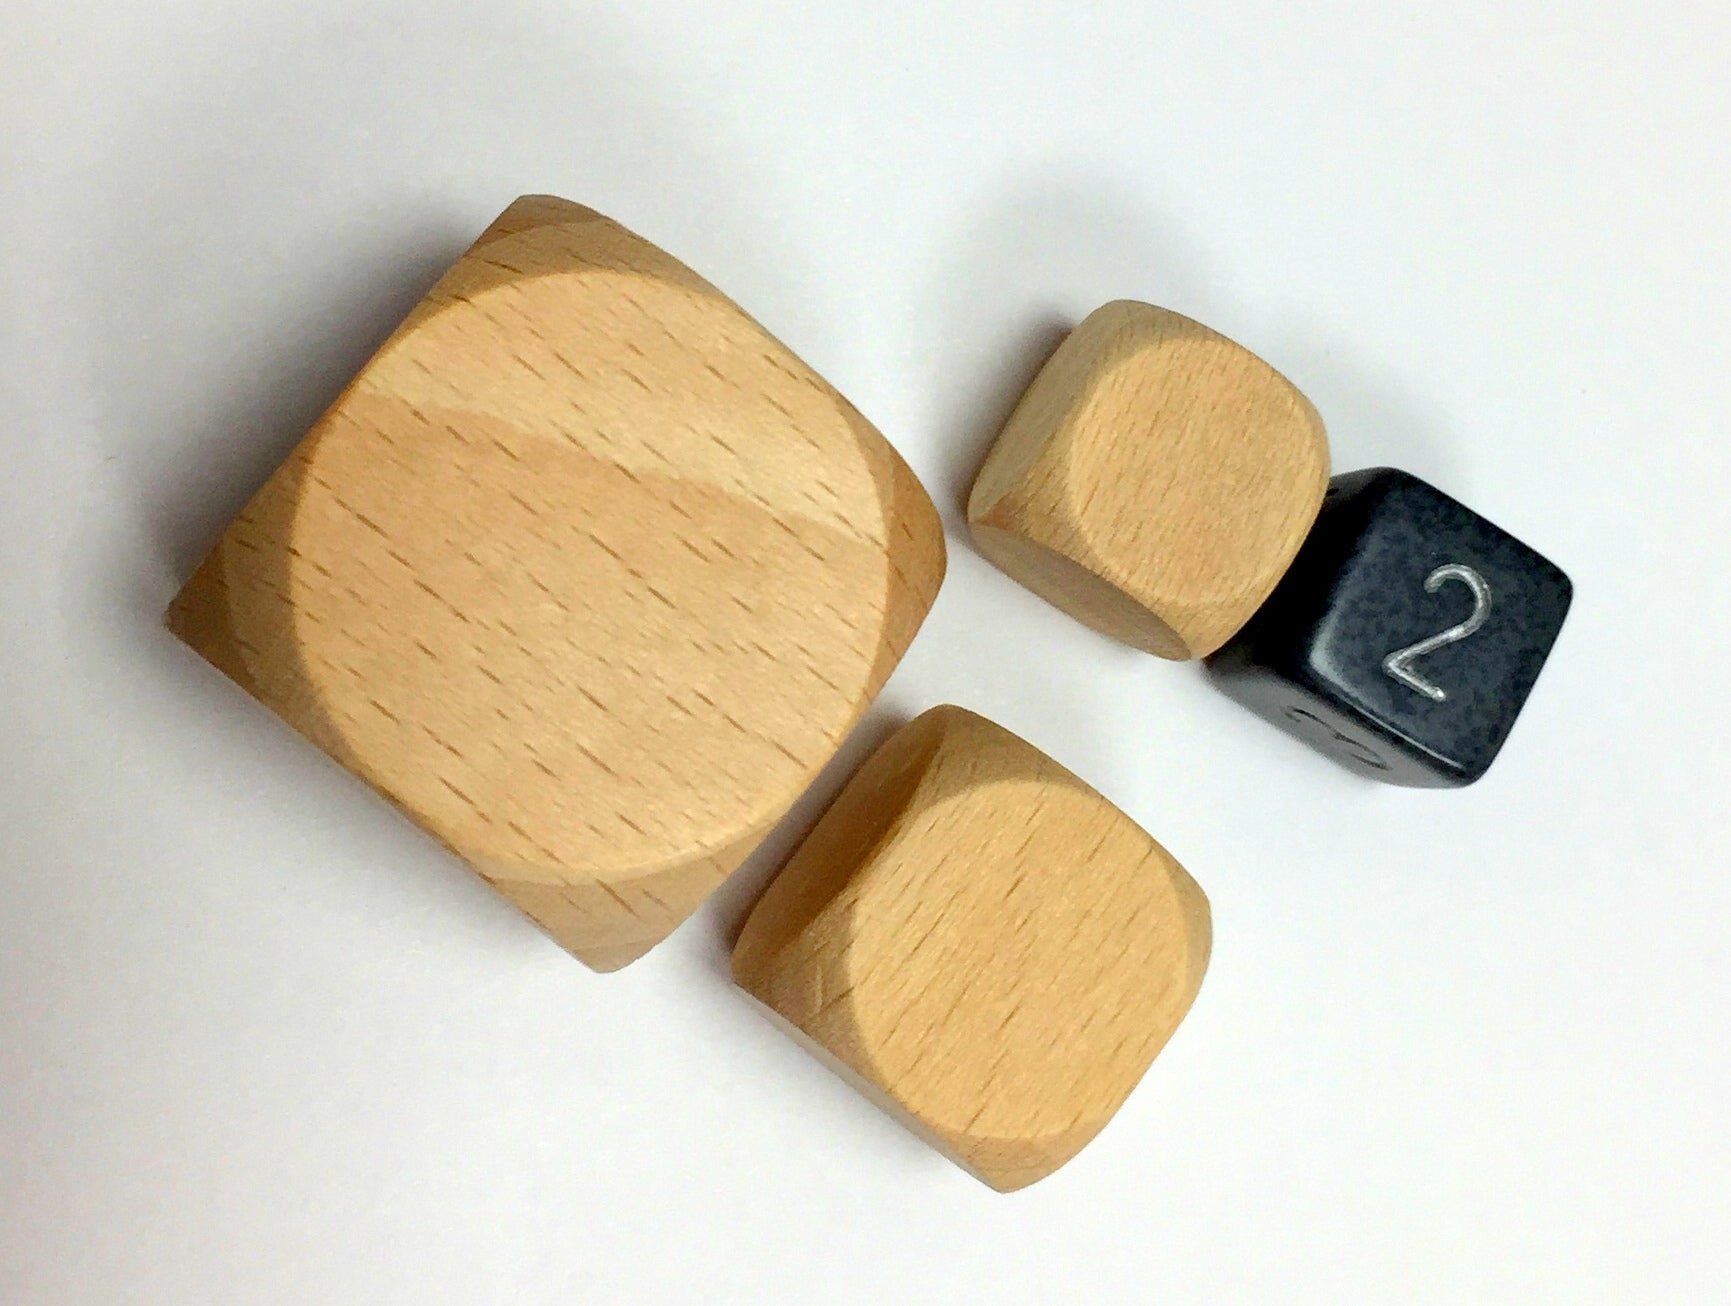 80mm large size wooden blank dice